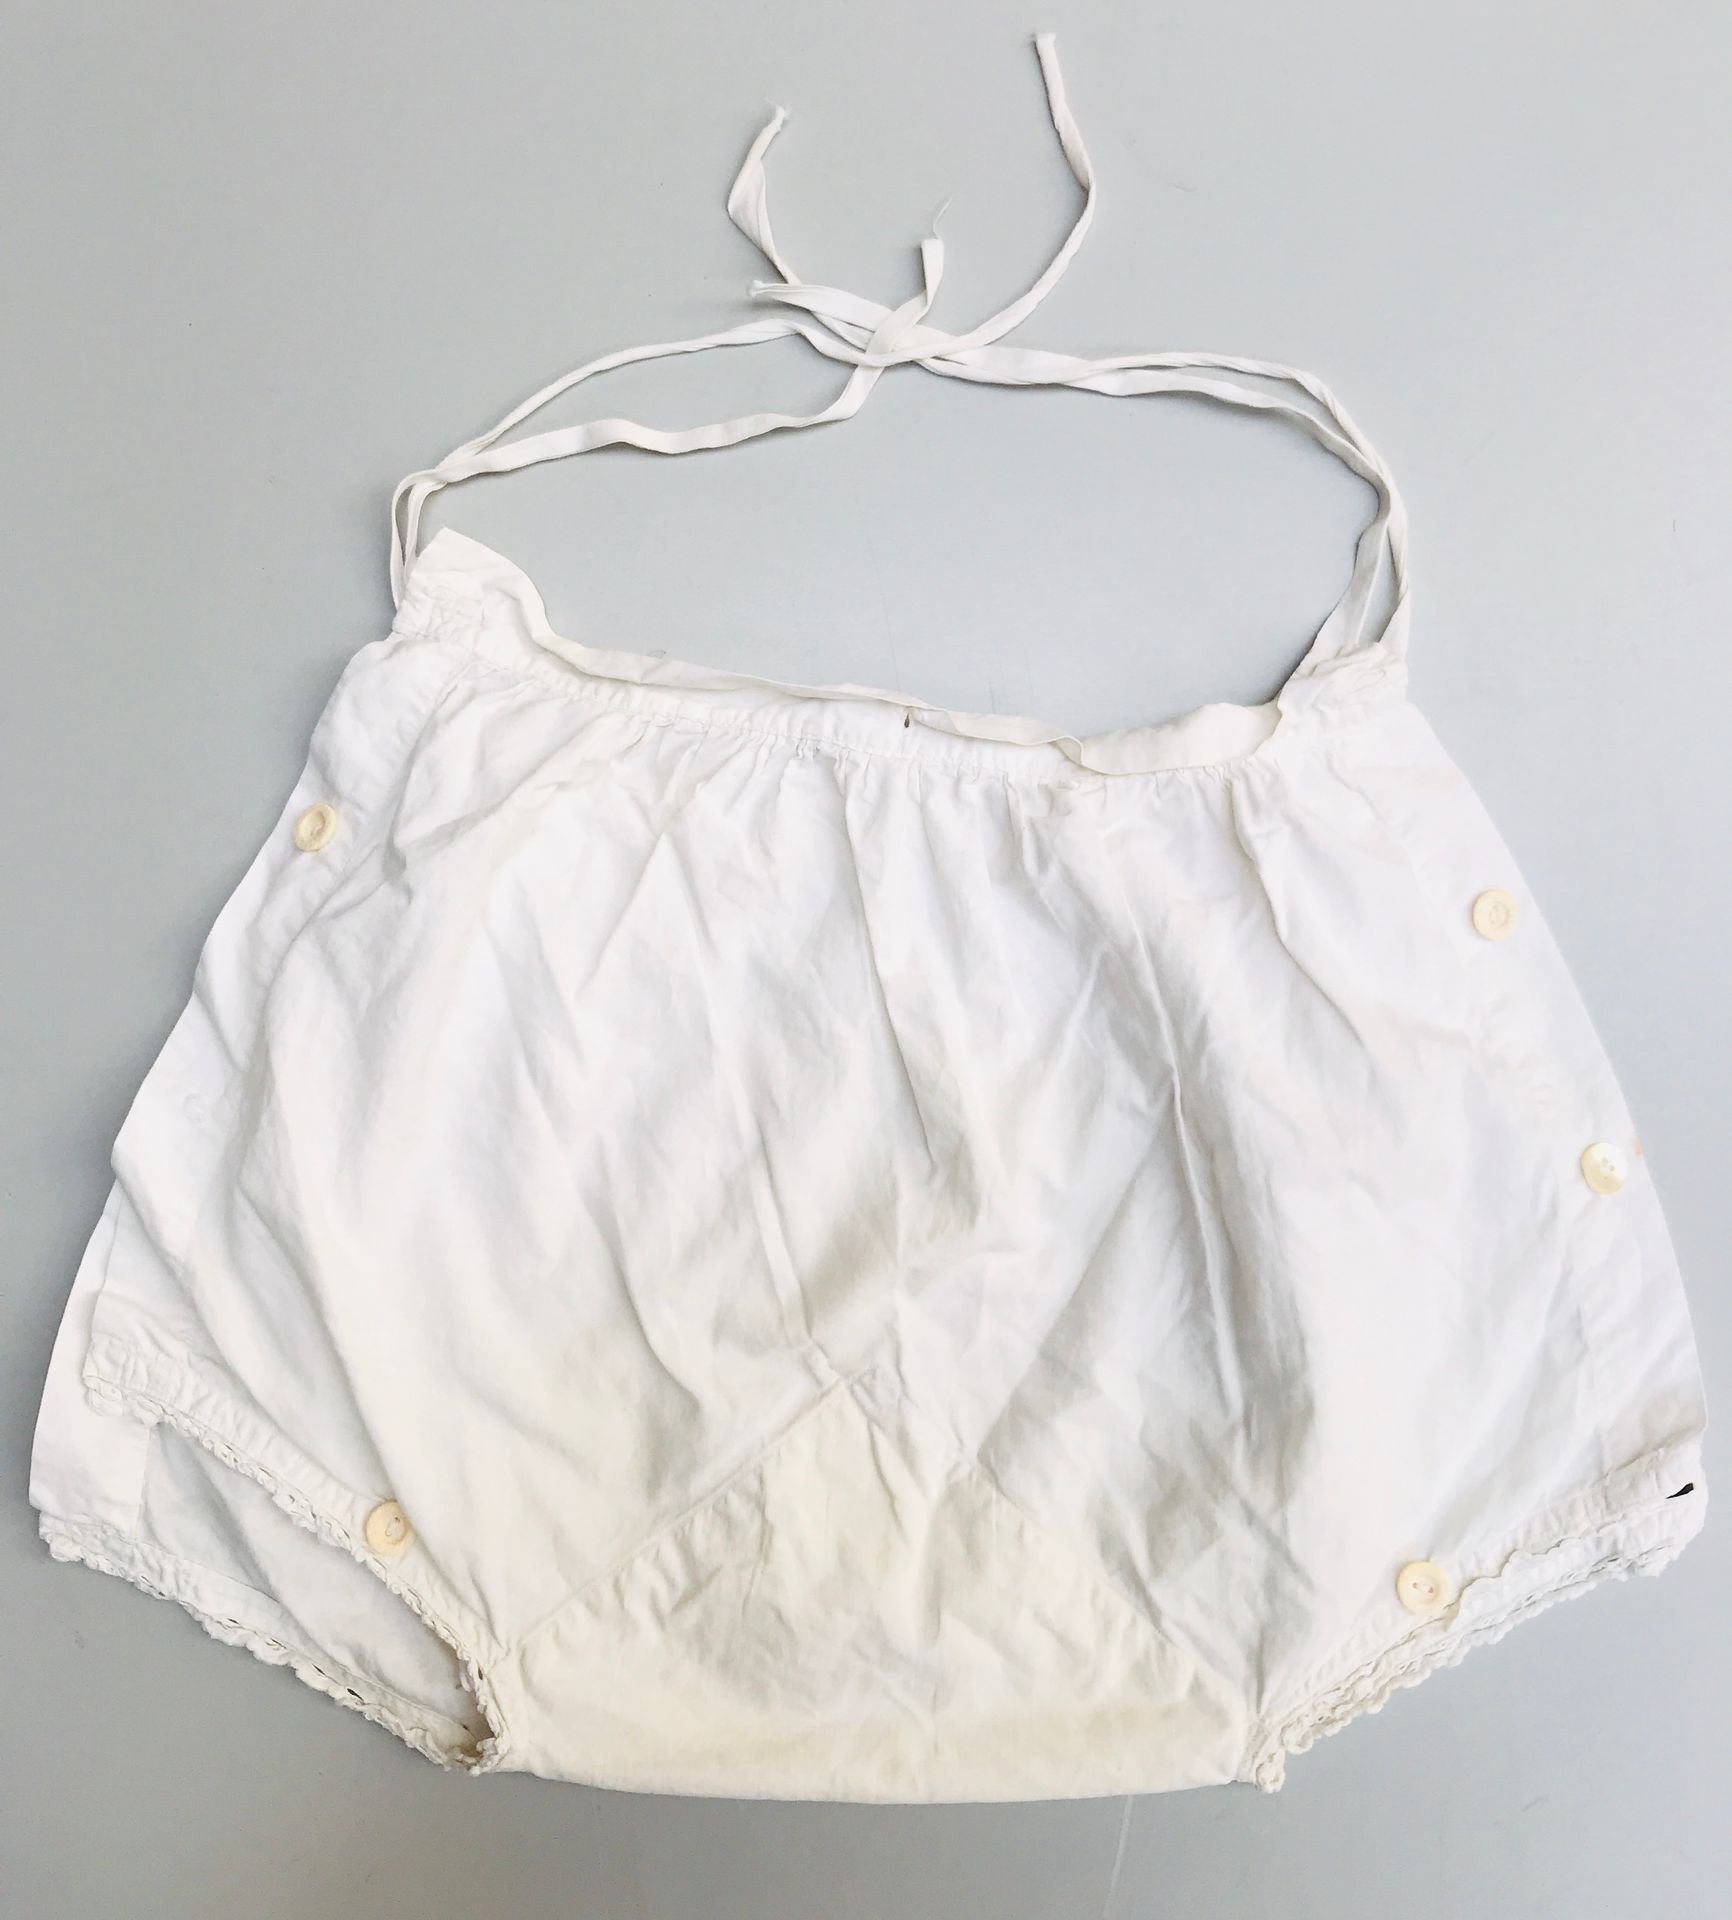 Quatre culottes d'enfant 
in white cotton, with buttoned tabs and fabric ties, s&hellip;